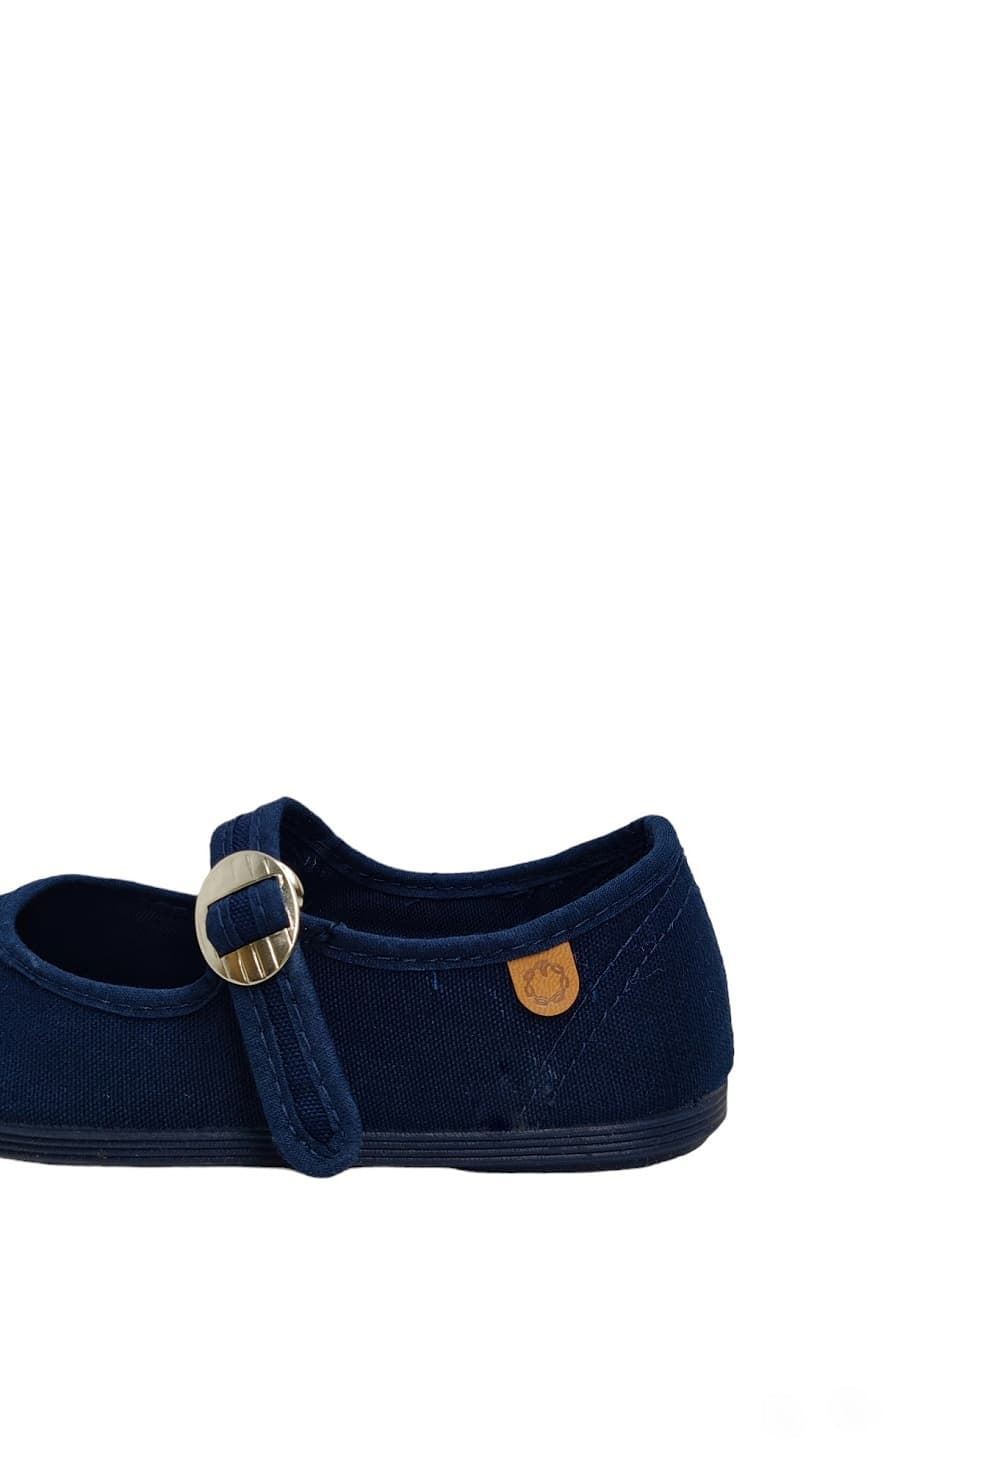 The Merceditas Chain for girls Navy Blue Canvas - Image 2